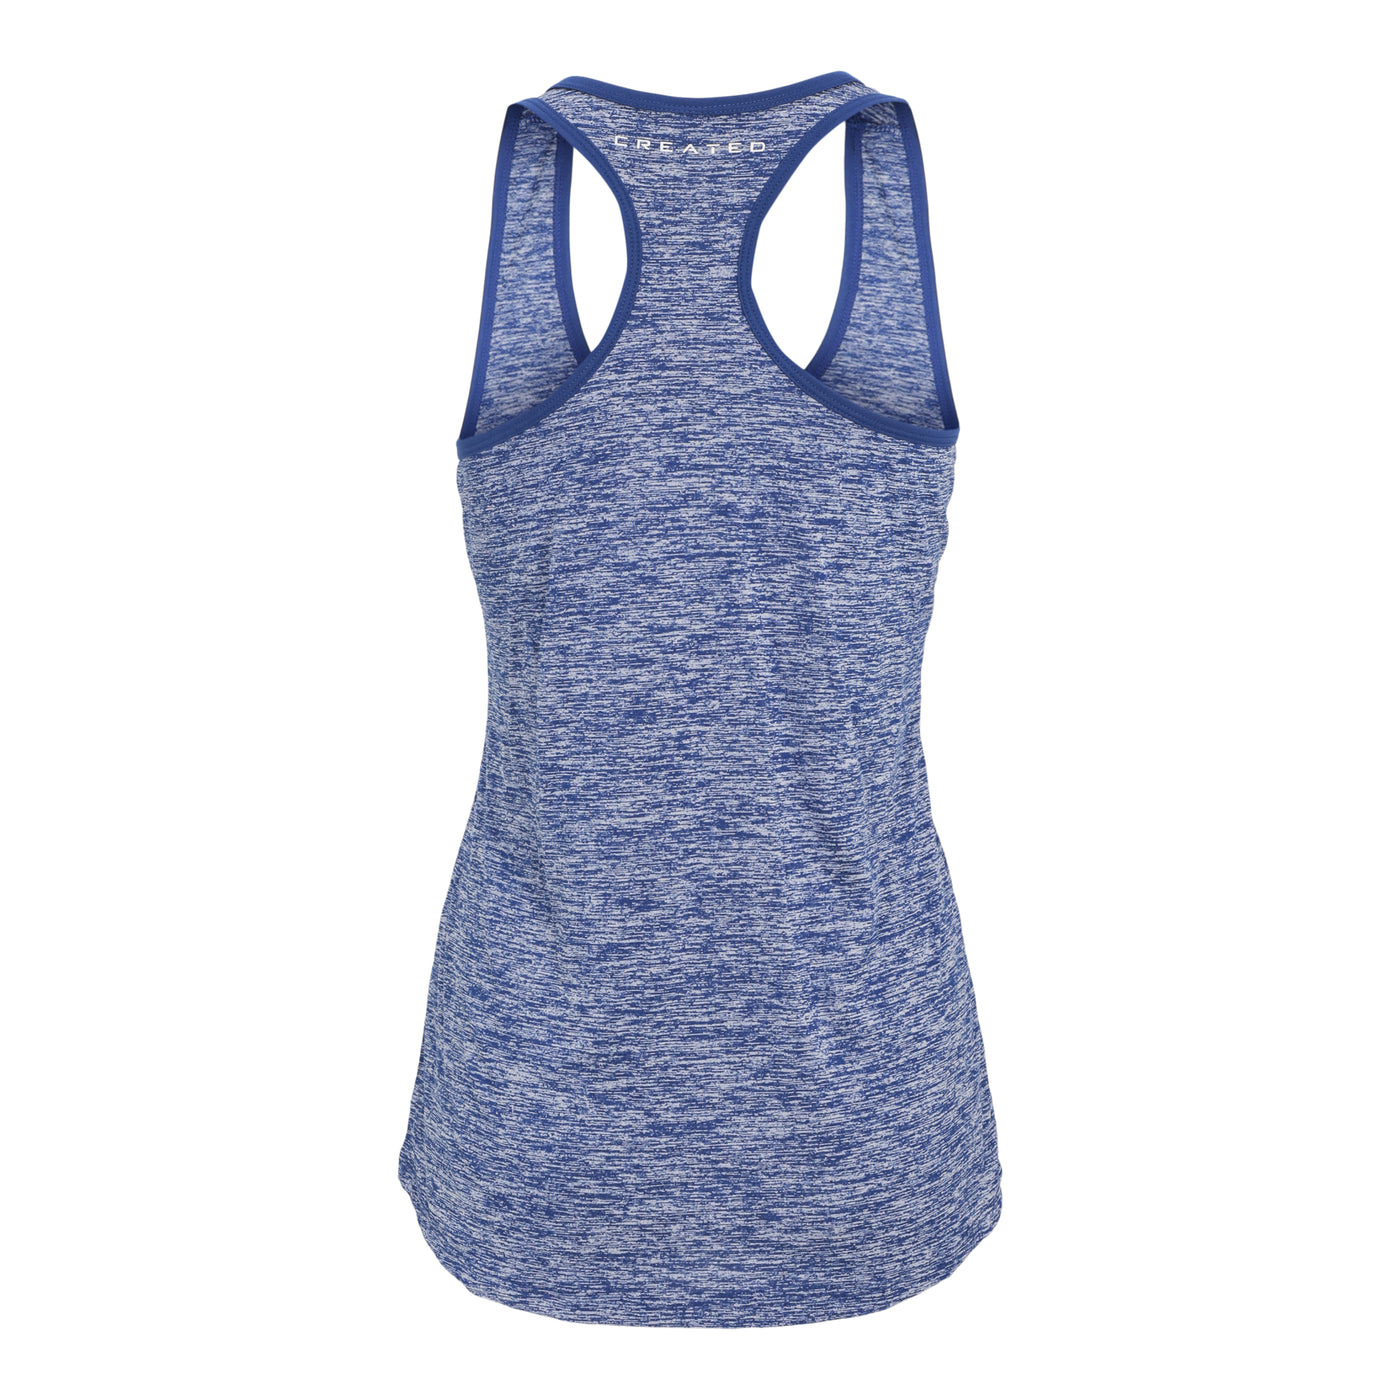 Created Women's Charged ice blue tank top alternate rear view